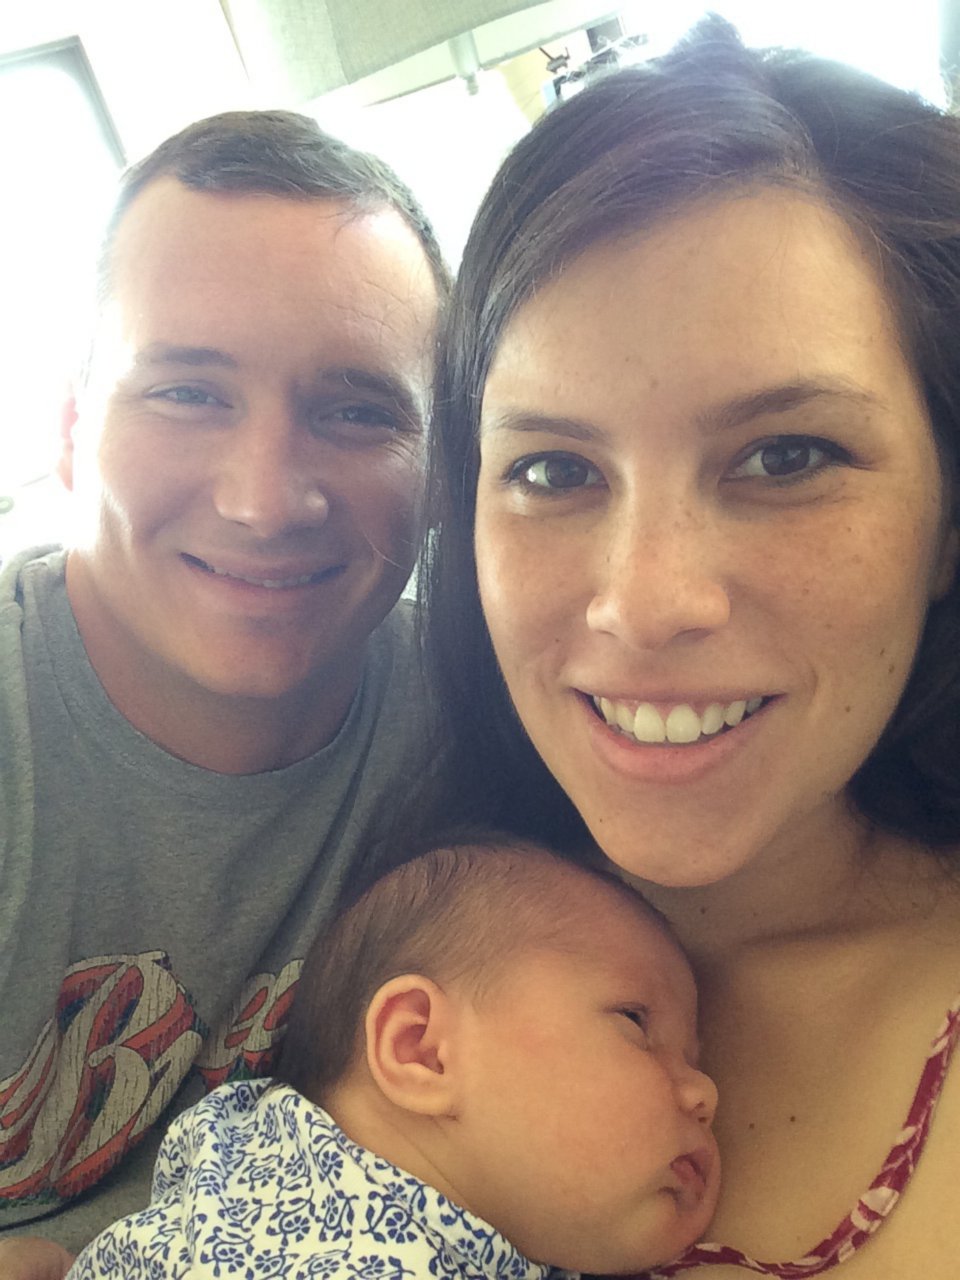 PHOTO: Colin Goddard, now 31, seen in an undated photo with his wife, Gabriella and their child.